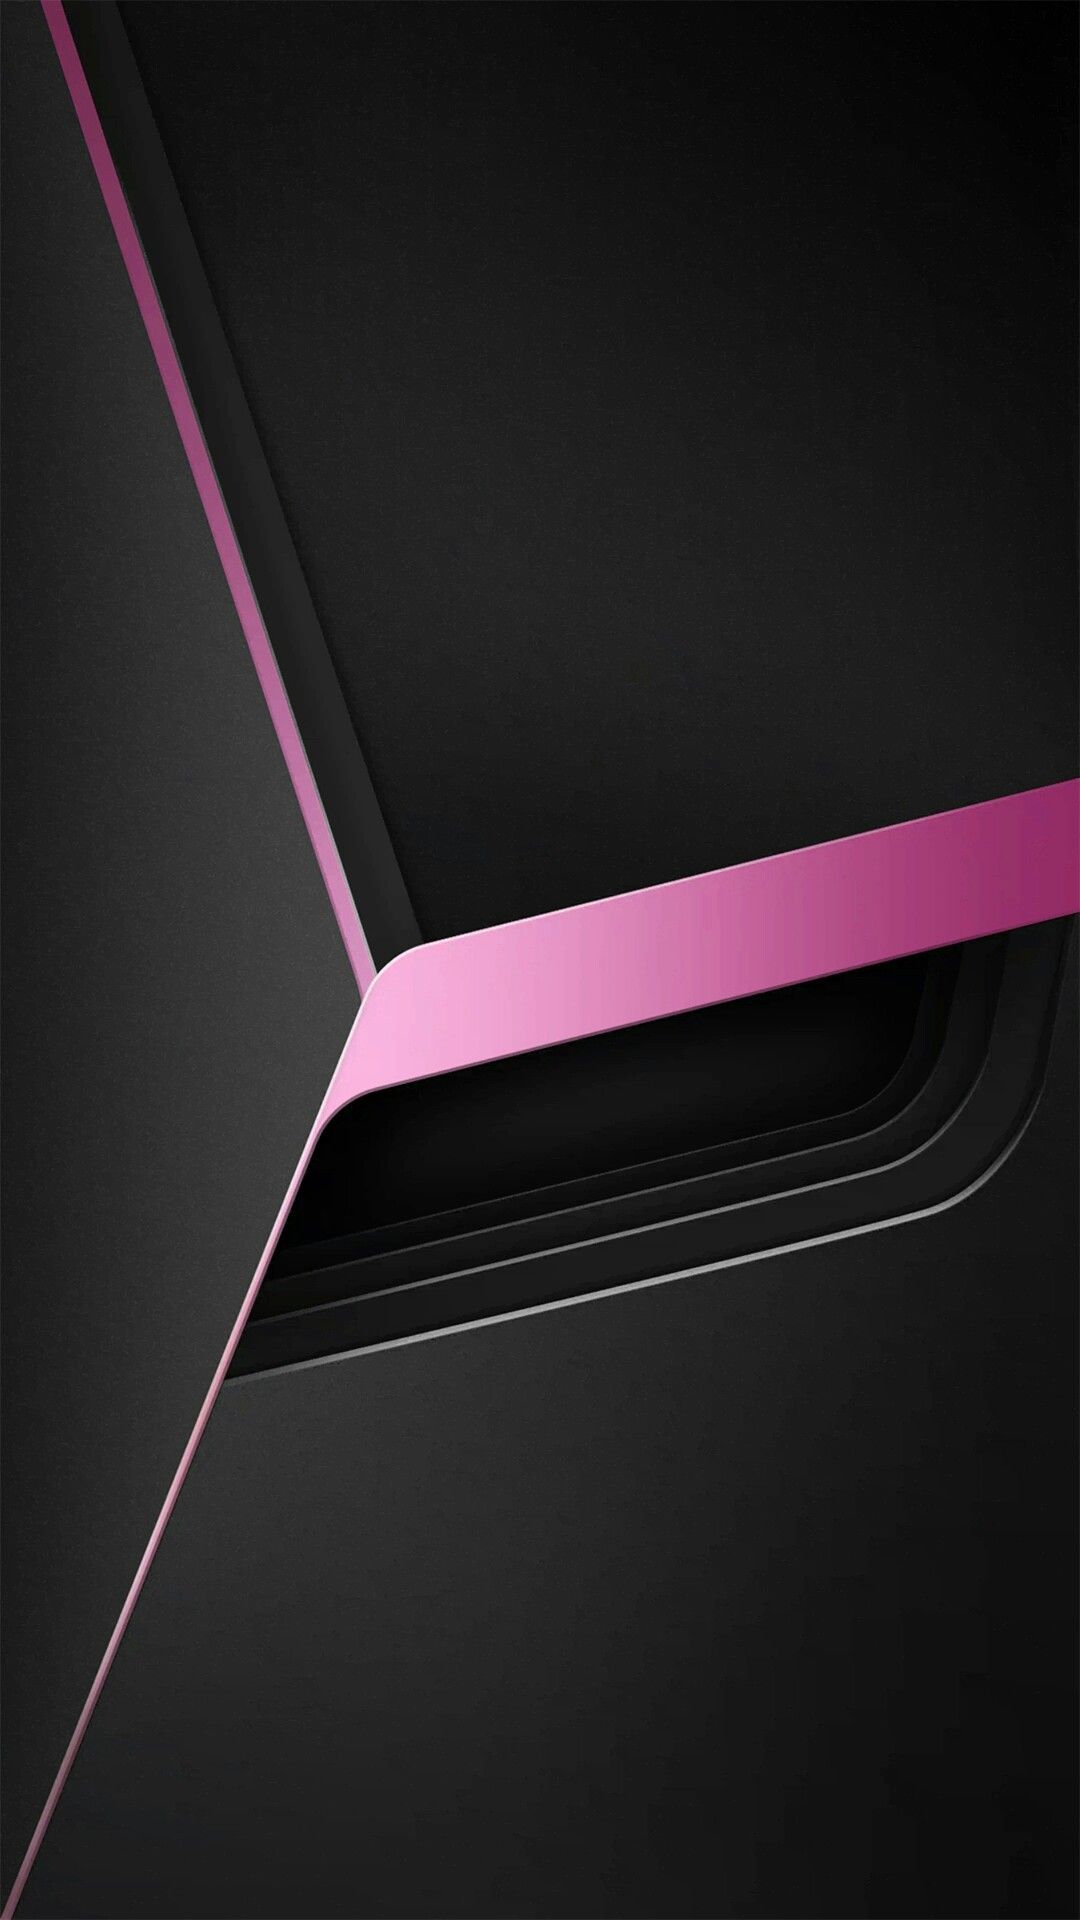 Black with Pink Abstract Wallpaper. Abstract wallpaper, Black phone wallpaper, Abstract wallpaper background